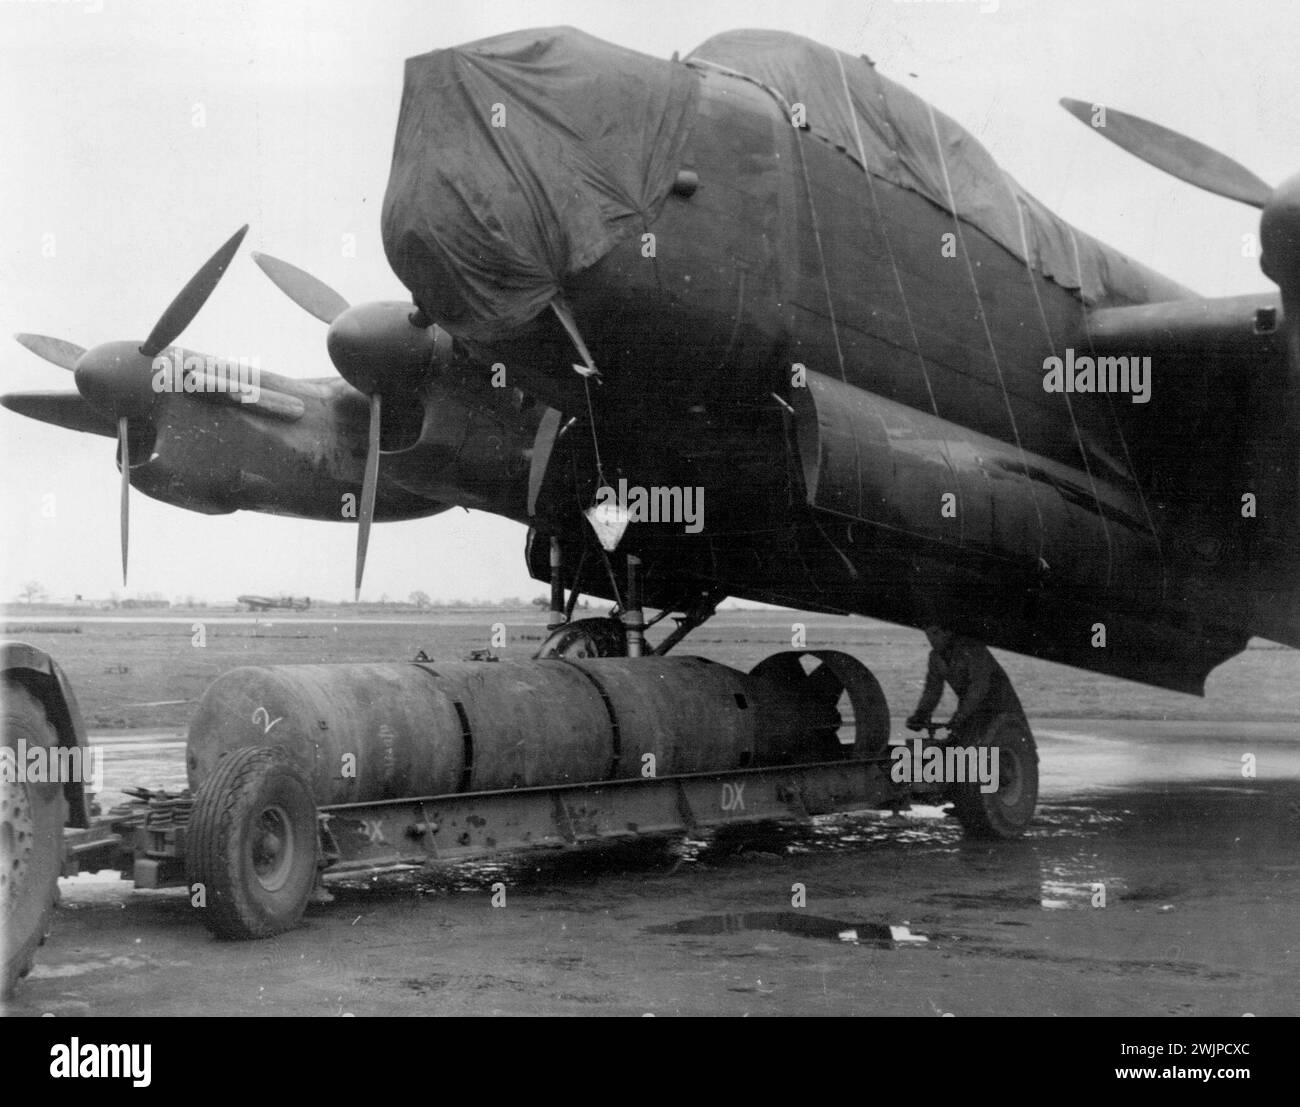 R.A.F. is 12,000 Lb, Bomb -- Preparing to load a 12,000 lb. bomb on to a waiting Lancaster. R.A.F. Bomber Command has been dropping an ever bigger bomb on industrial targets in occupied France and Germany. The new 12,000 pounder has been used with devastating effects on factories working for the enemy. March 11, 1944. (Photo by British Official Photograph). Stock Photo